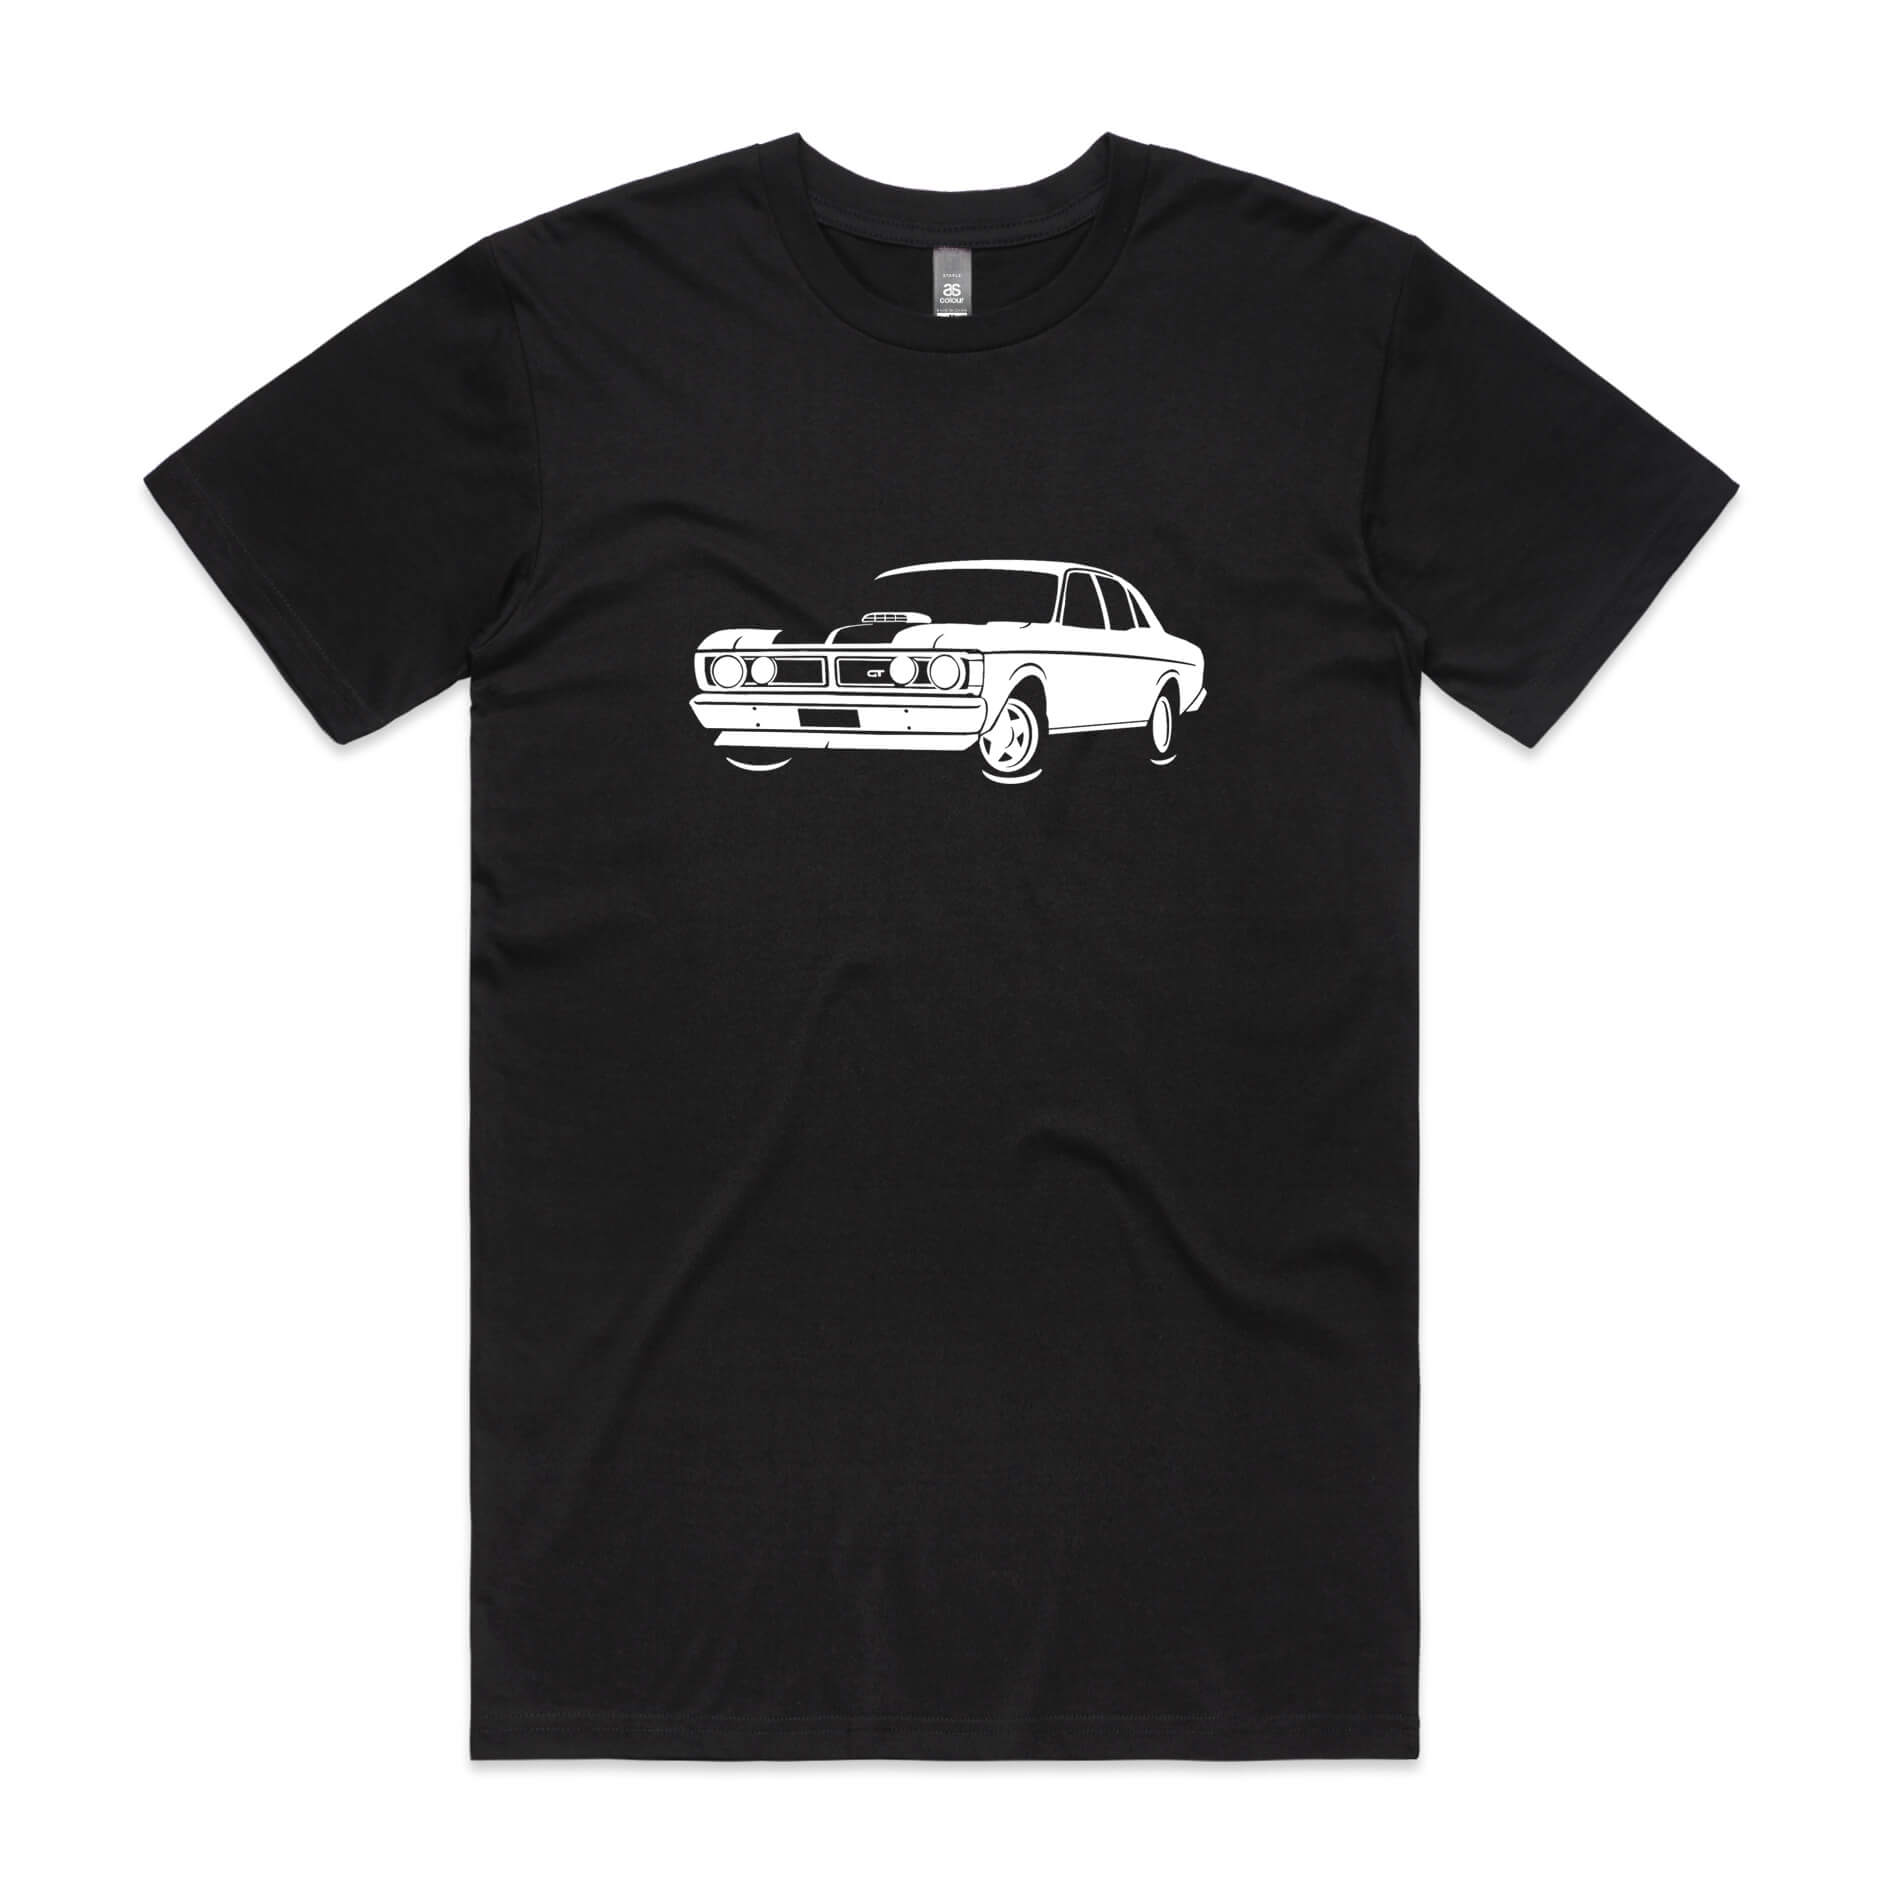 Ford XY Falcon t-shirt in black with white car graphic